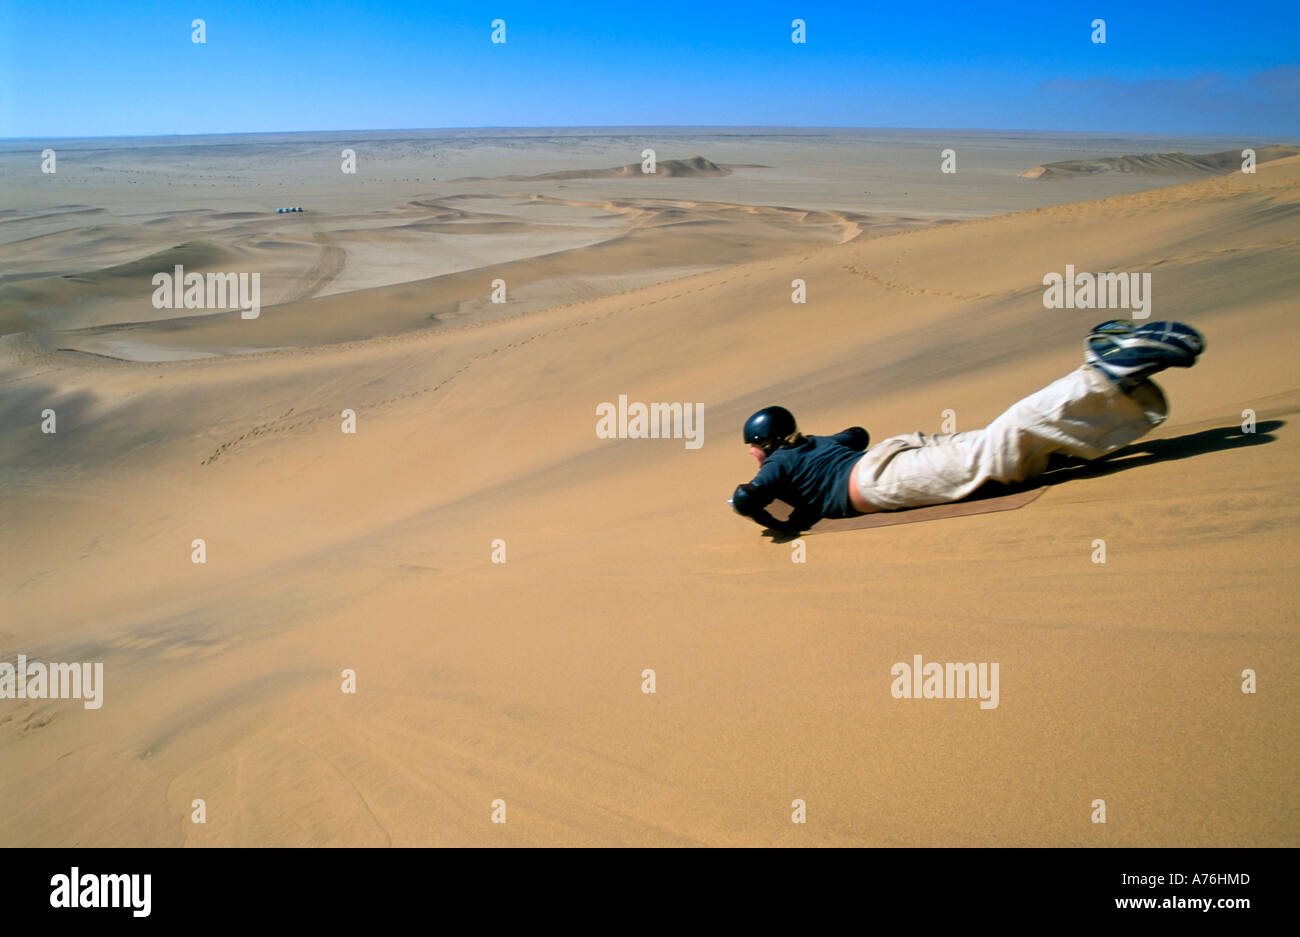 A sand boarder descending the sand dunes of Namibia. Stock Photo